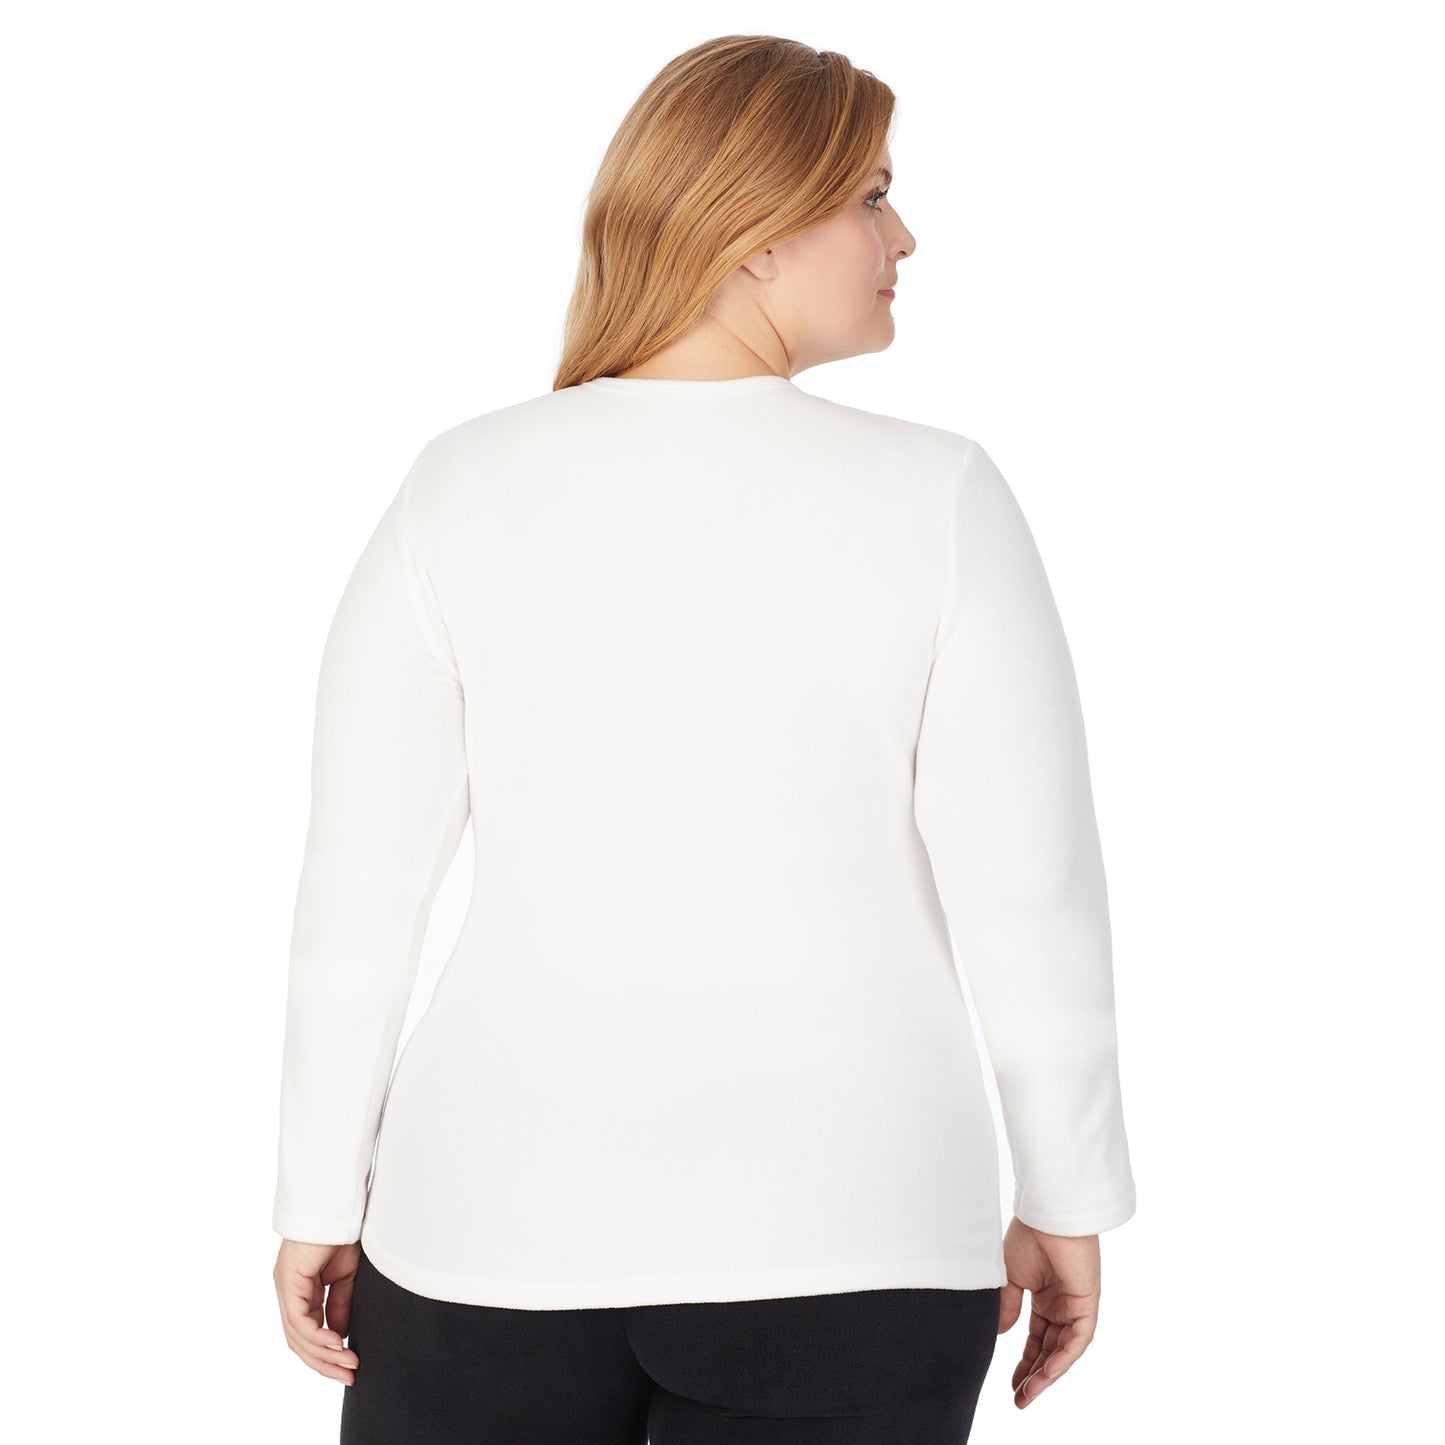 Off White; Model is wearing size 1X. She is 5'9", Bust 38", Waist 36", Hips 48.5".@Upper body of a lady wearing white long sleeve crew